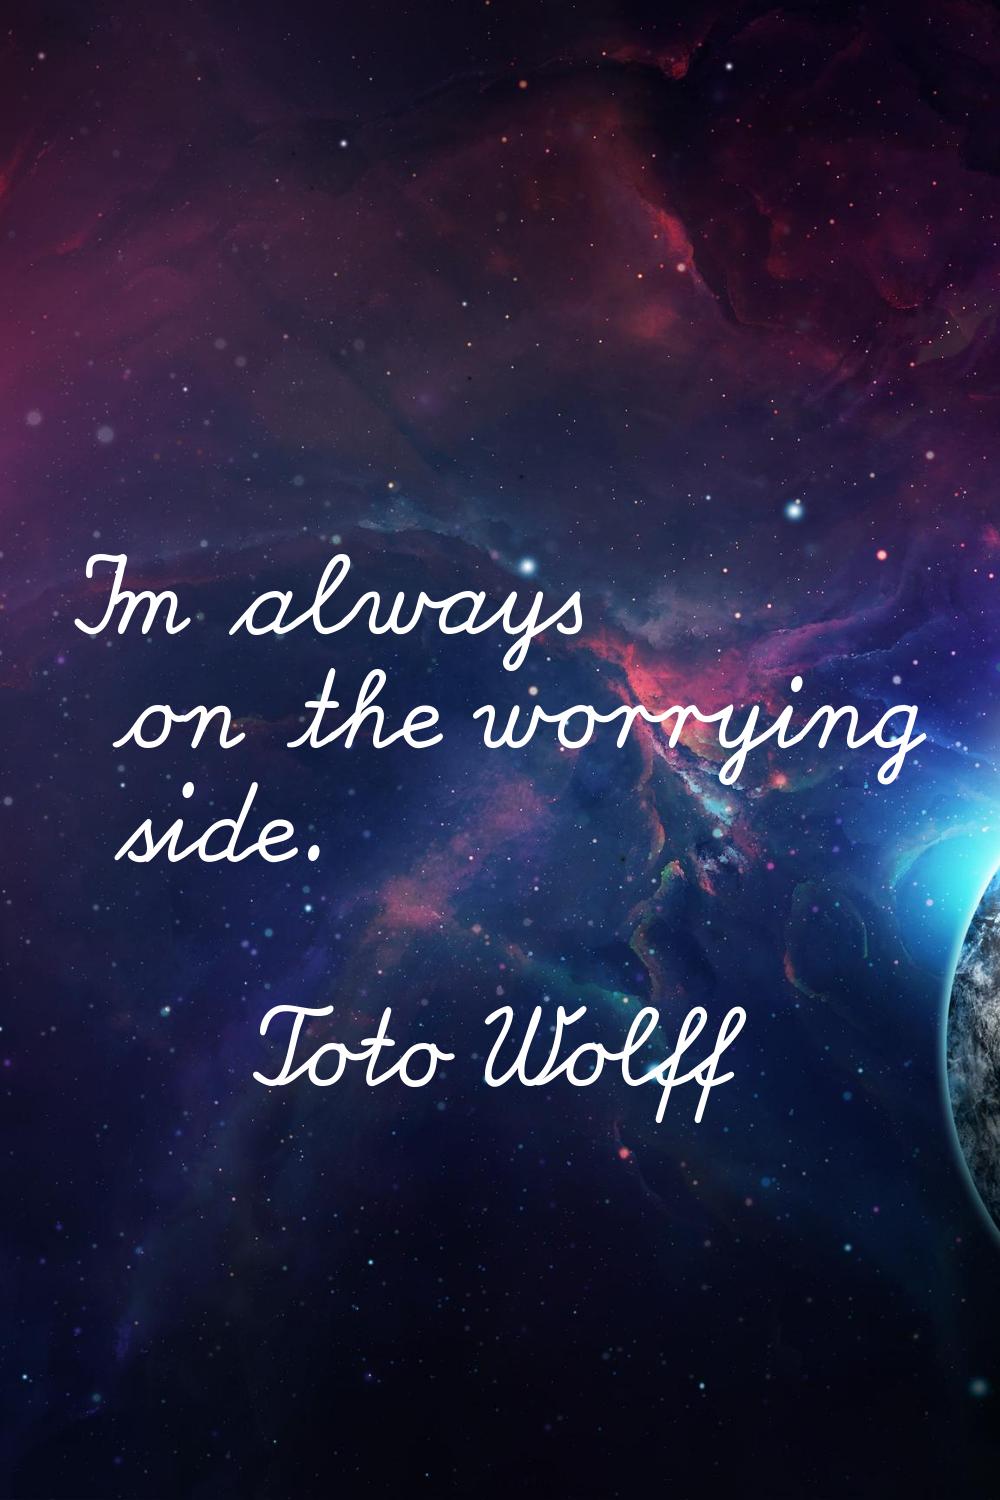 I'm always on the worrying side.